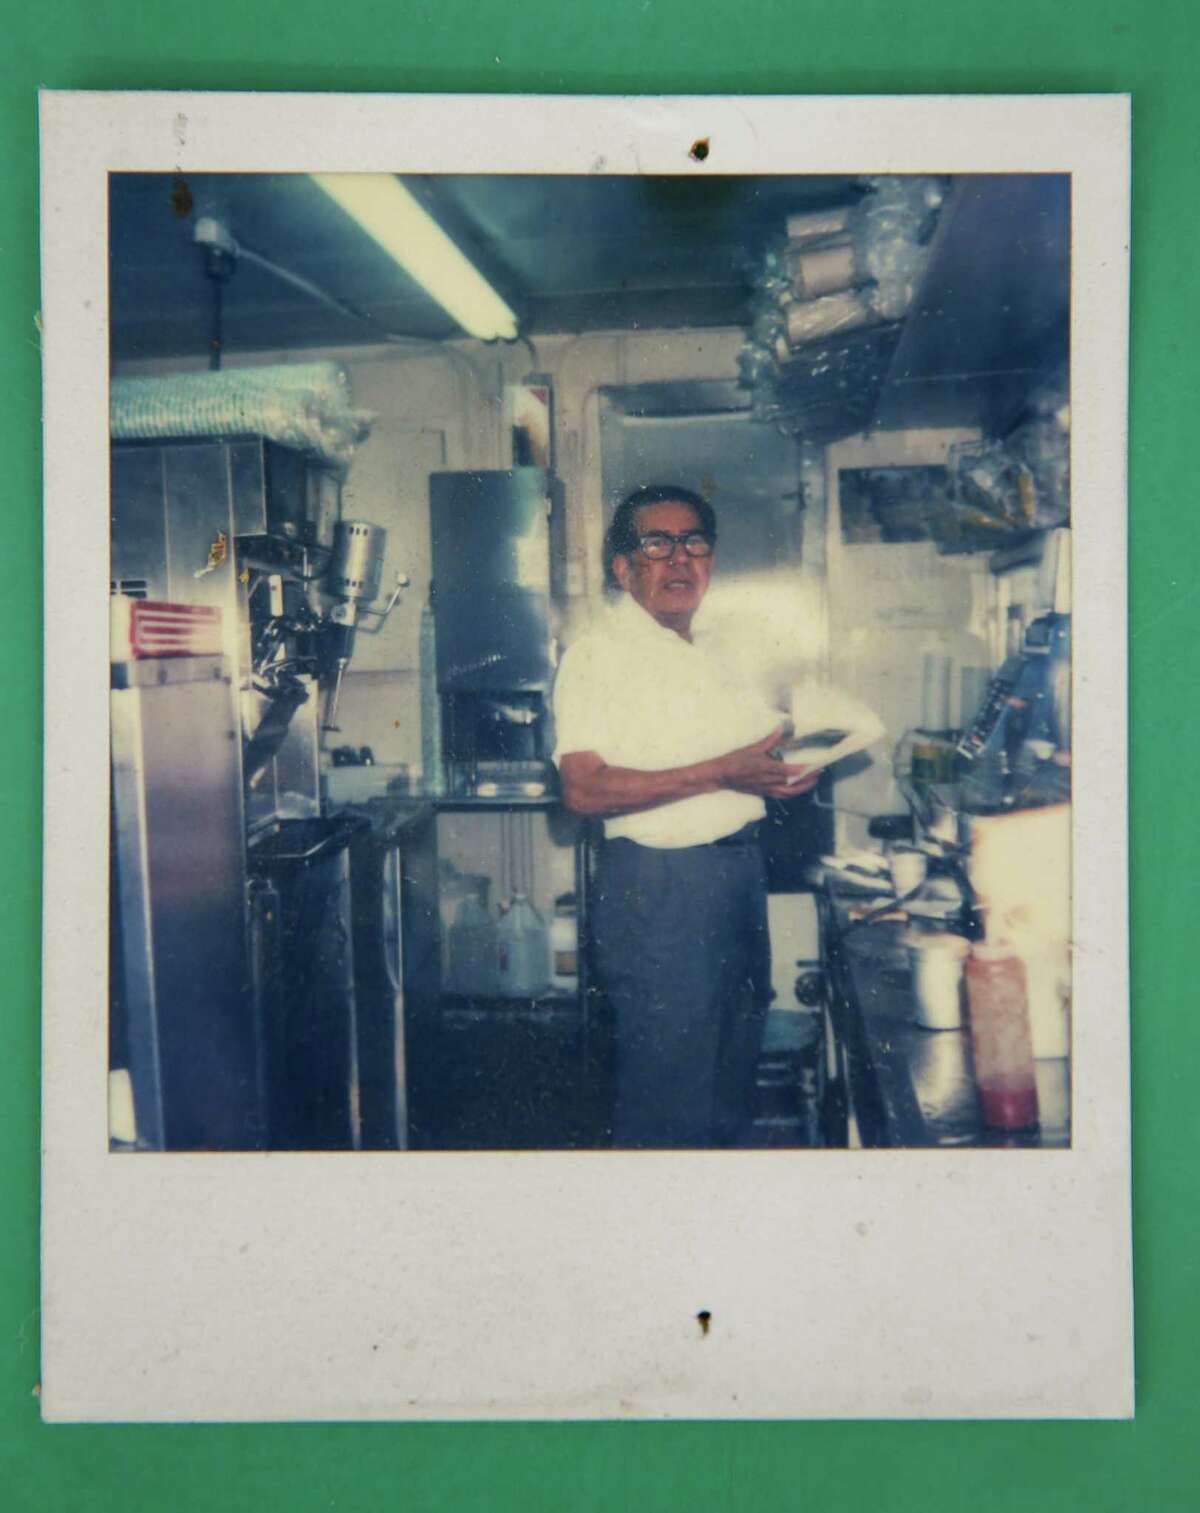 A picture of Carlos P. Martinez, Poppa Burger’s second owner, working inside the kitchen. Photographed on Tuesday, April 12, 2022, in Houston.